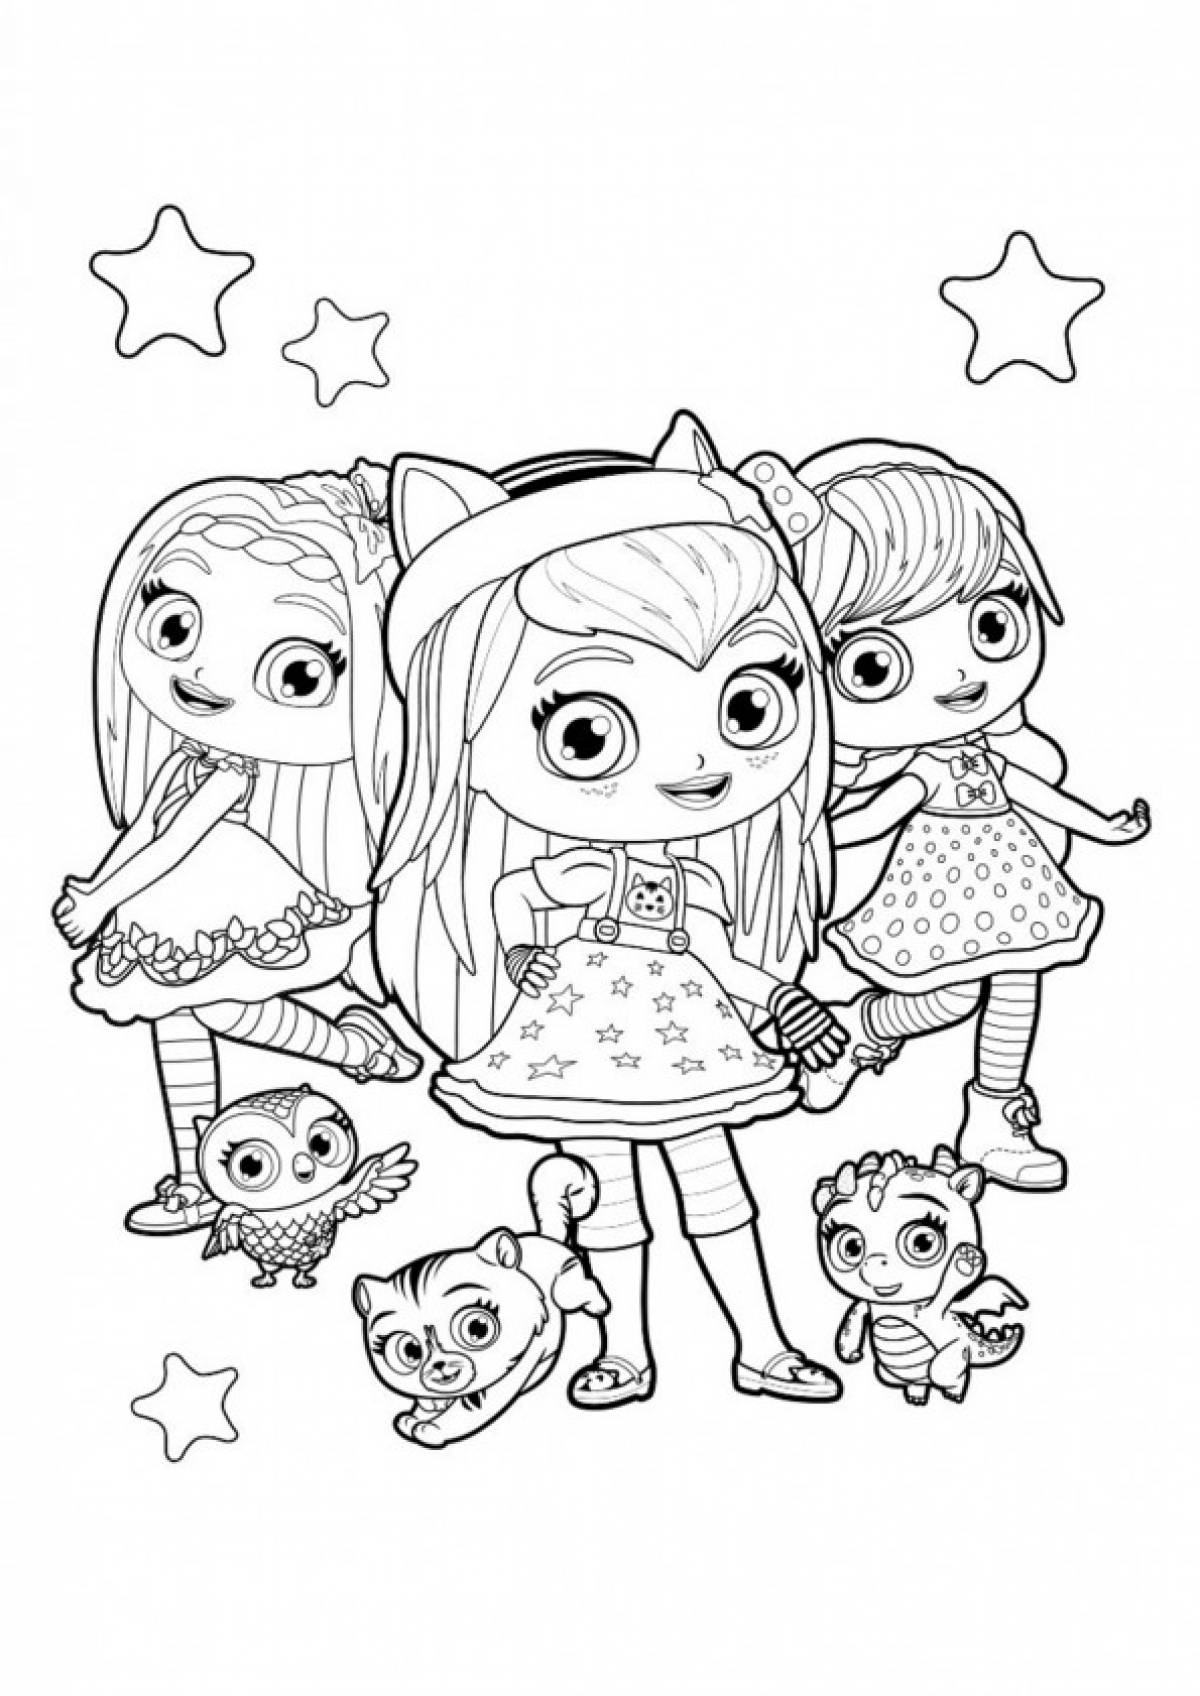 Little Charmers coloring page